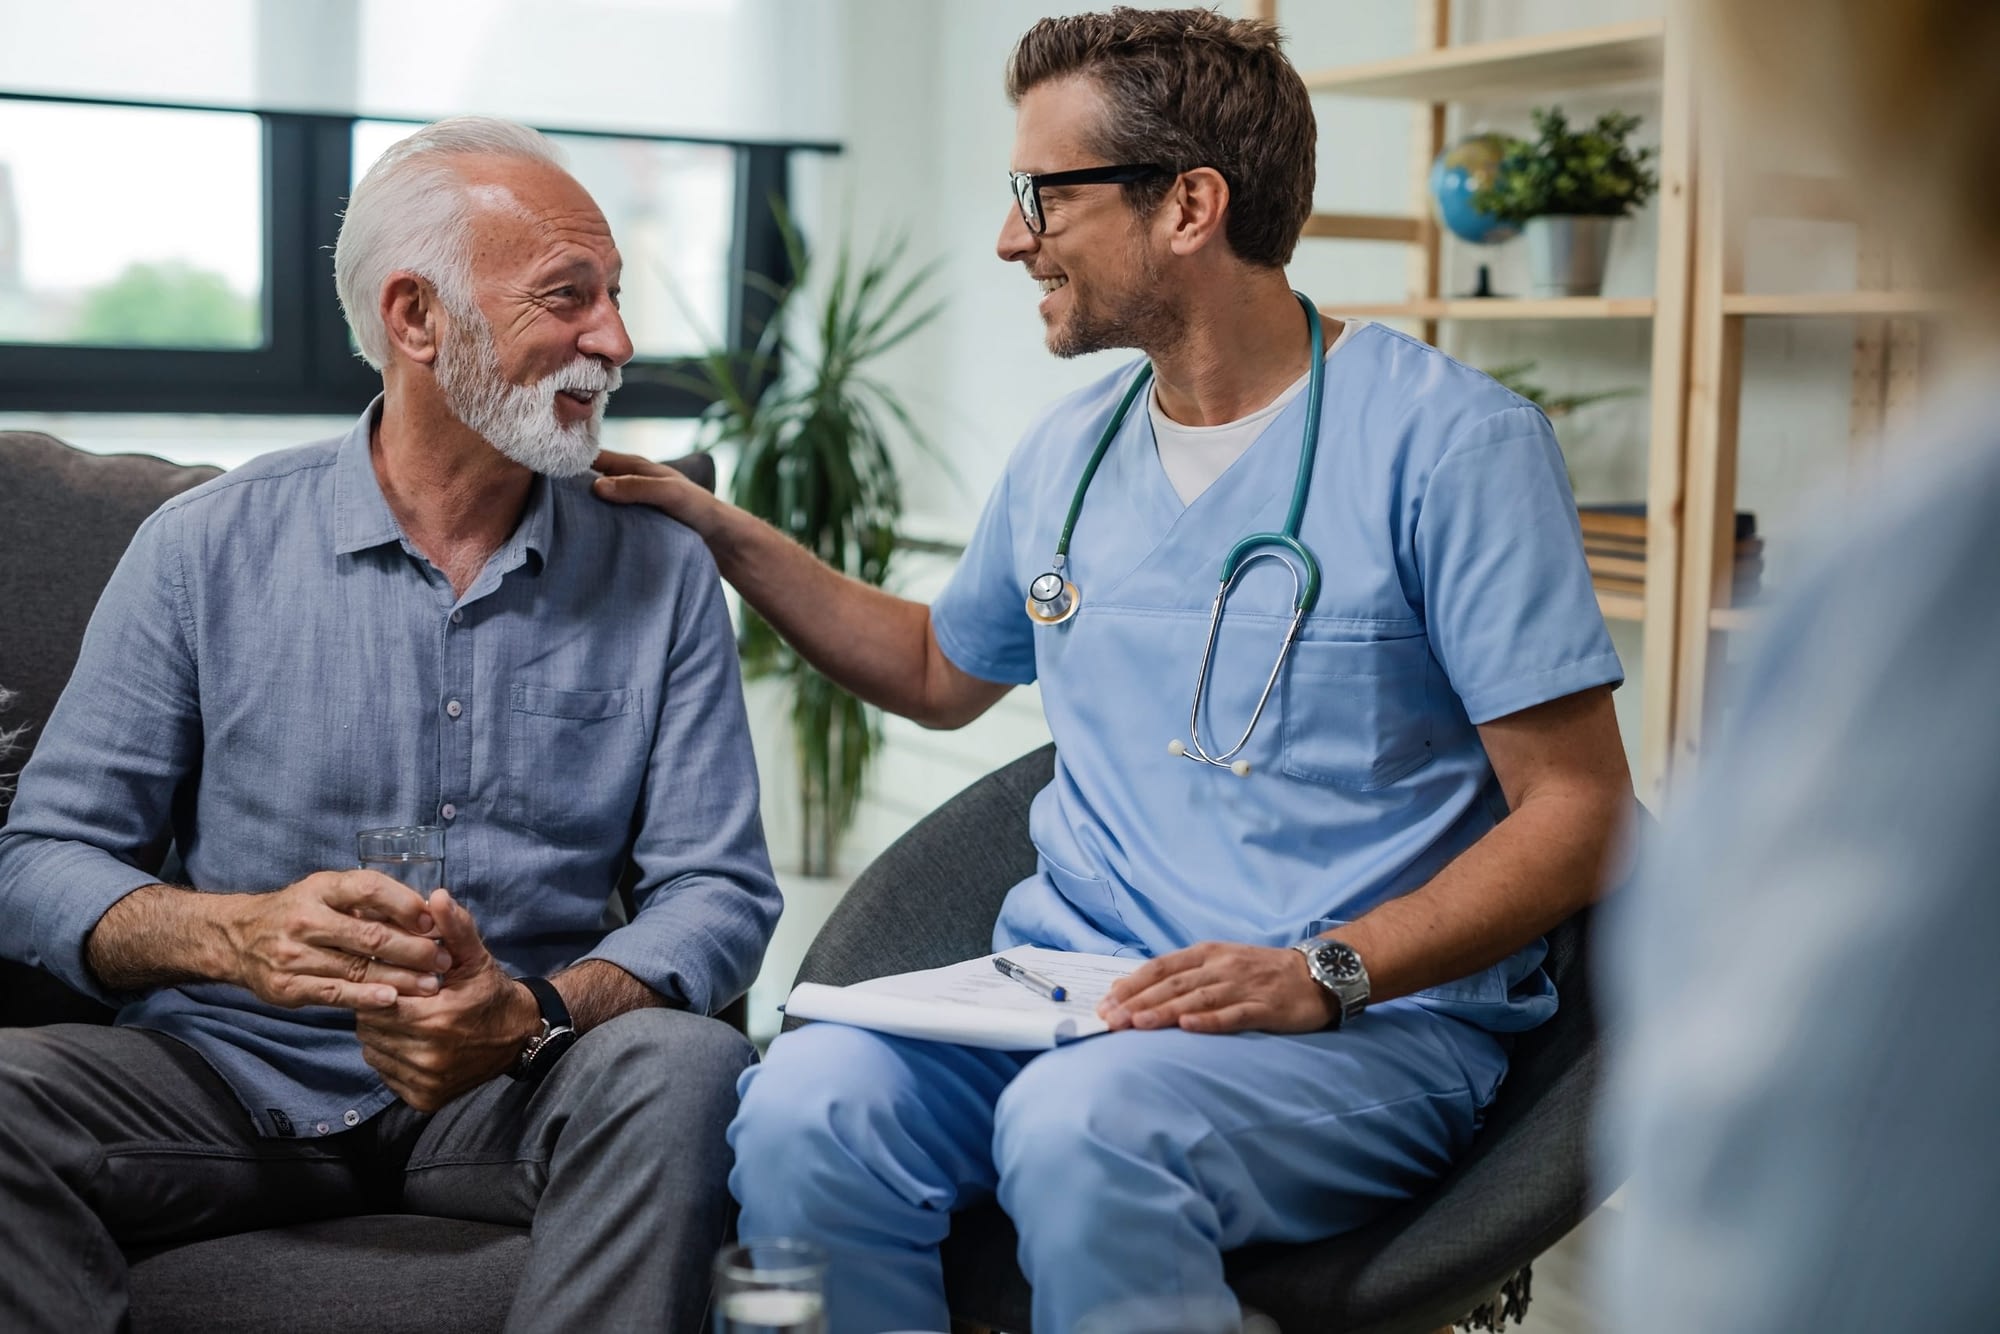 Senior Male Talking With Male Doctor